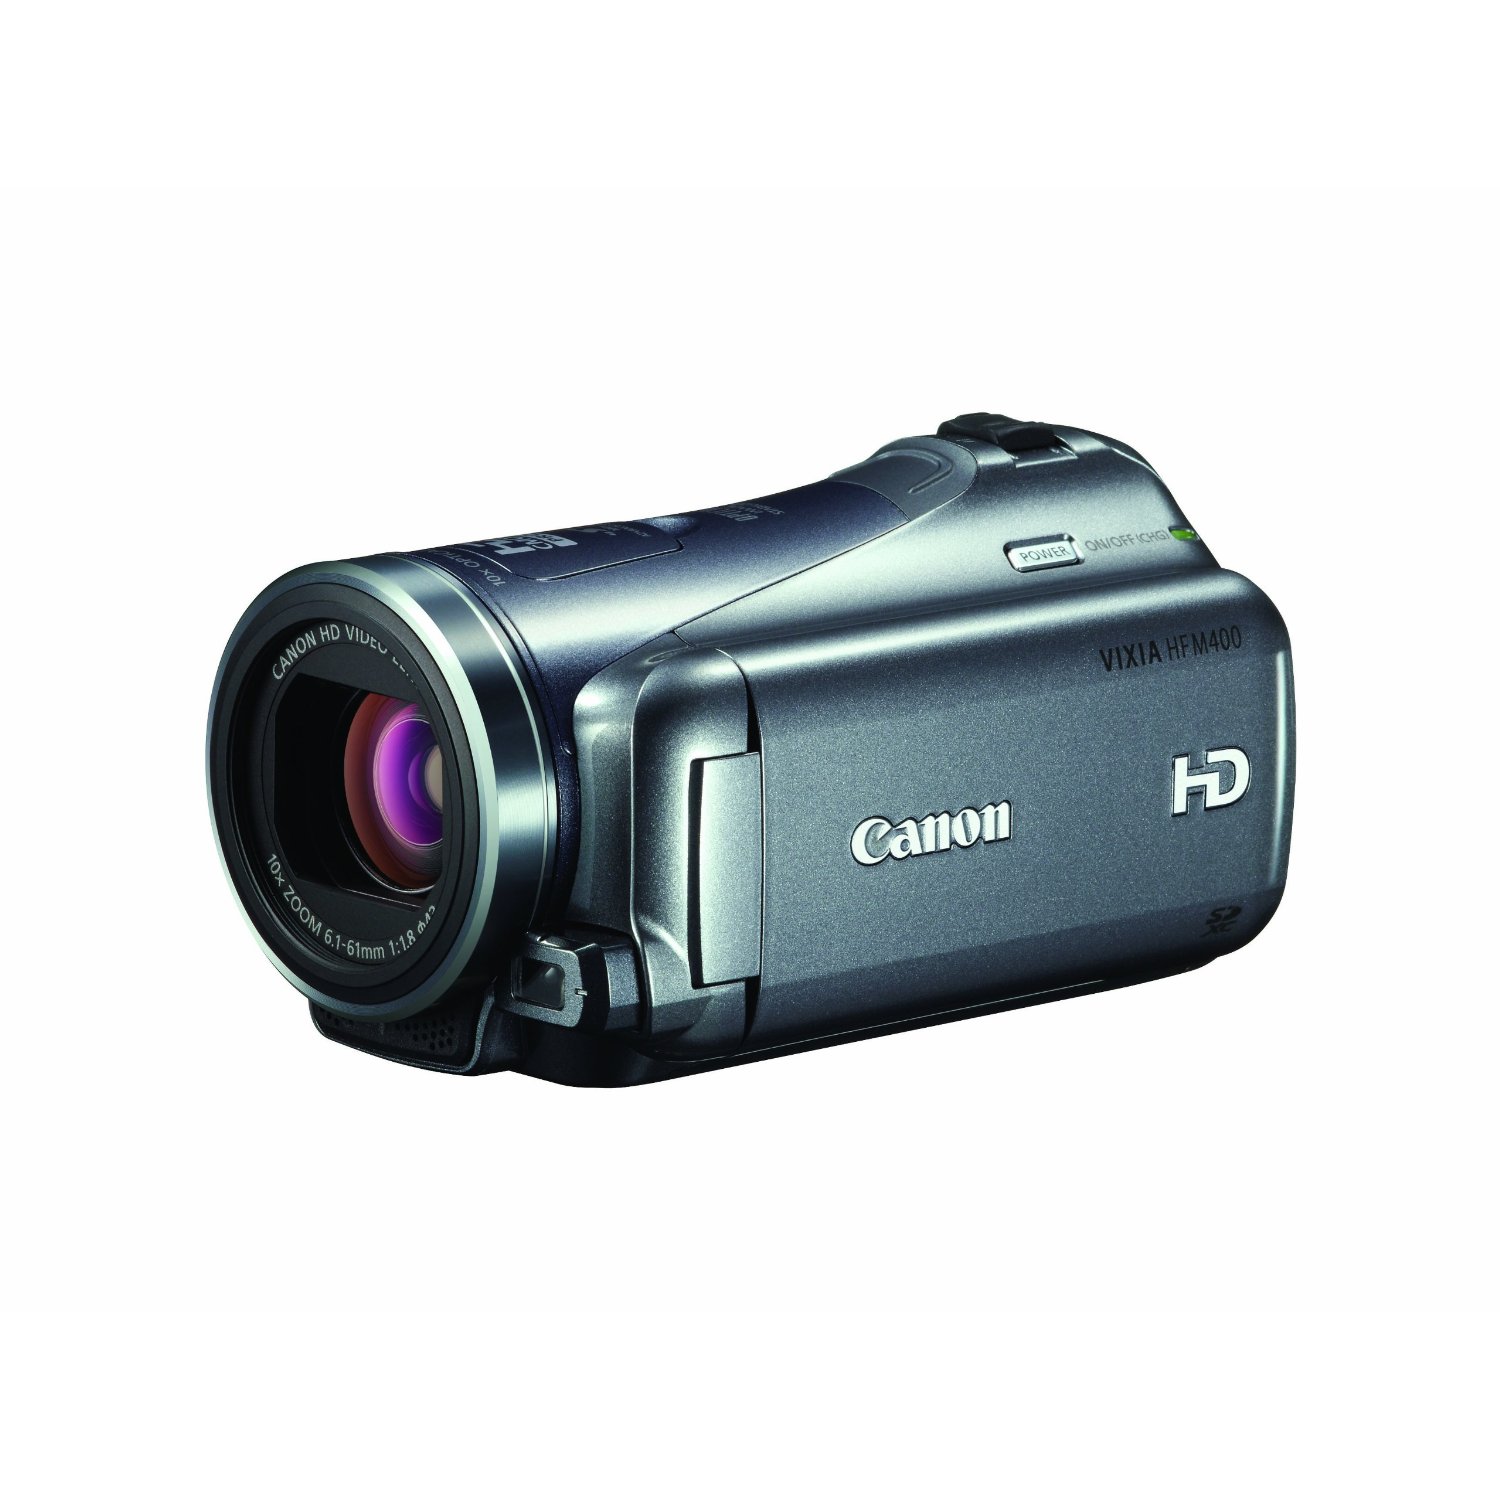 http://thetechjournal.com/wp-content/uploads/images/1111/1320517872-canon-vixia-hf-m400-full-hd-camcorder-1.jpg